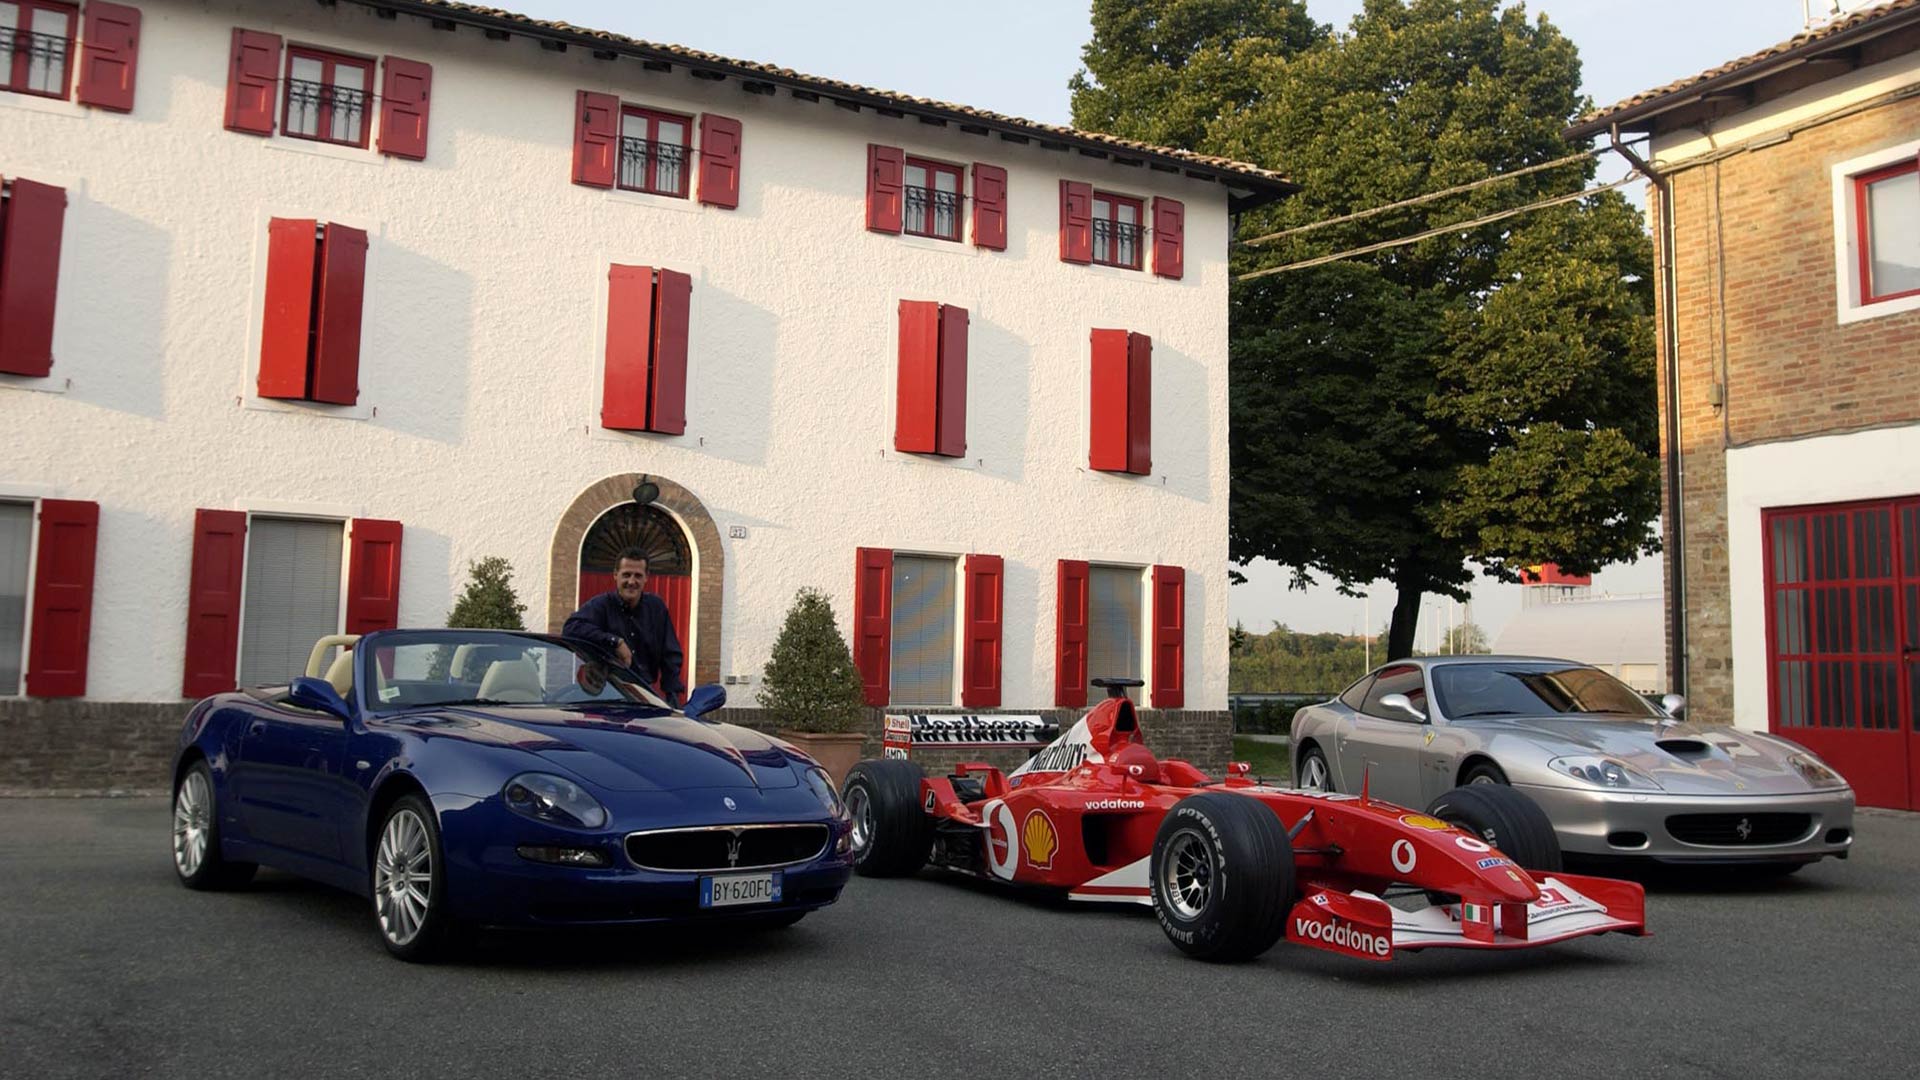 Michael Schumacher and his car collection